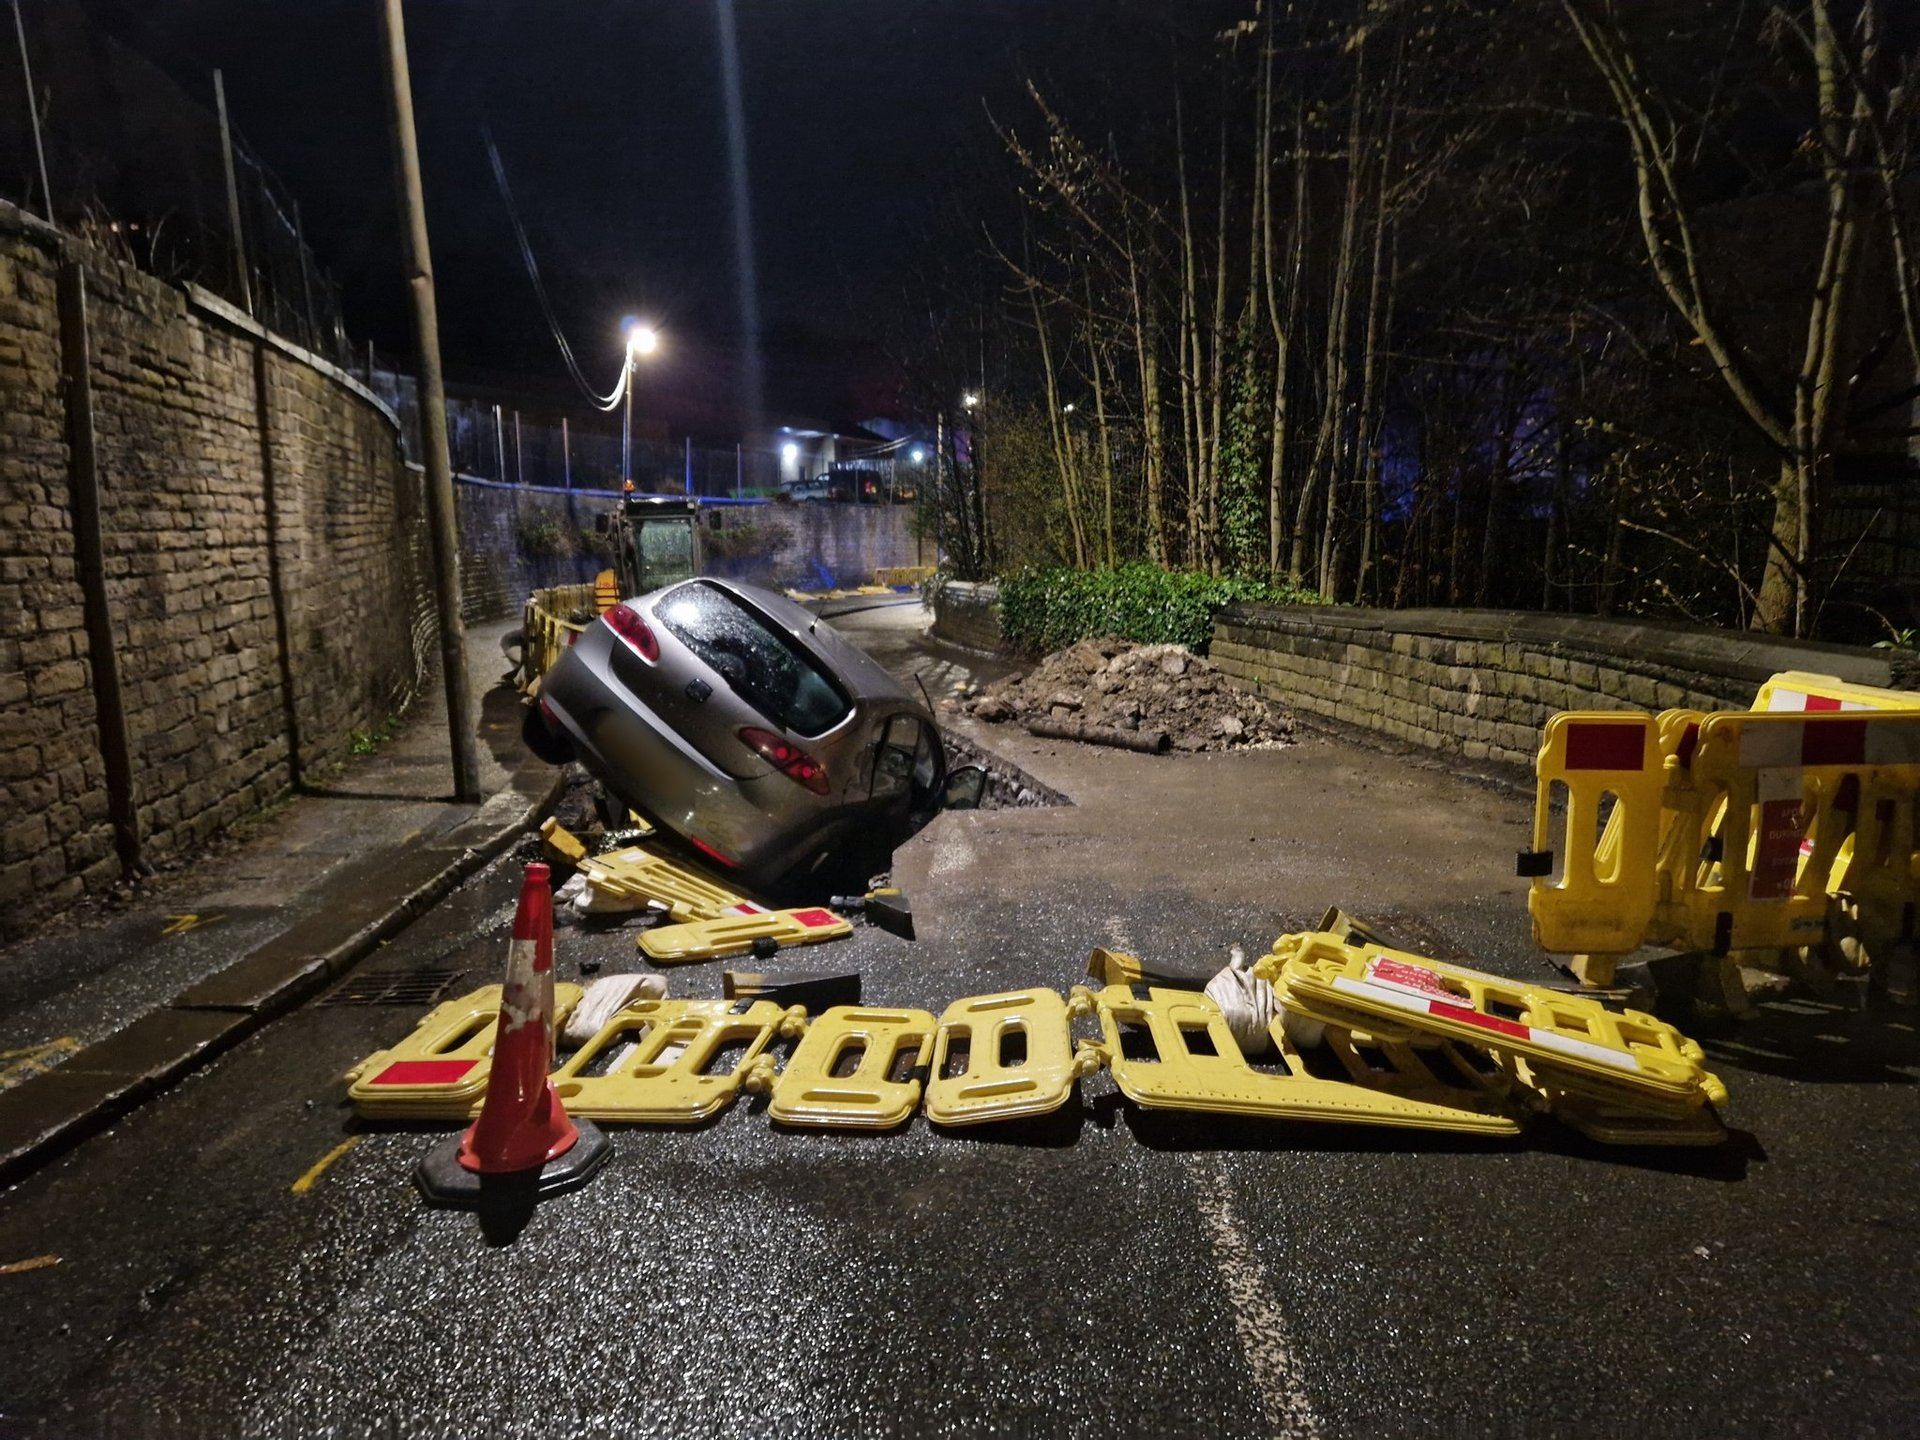 Police were called to Dale Street in Huddersfield at 11.23pm on Tuesday to a report a car had crashed where they found the vehicle stuck in the ground.